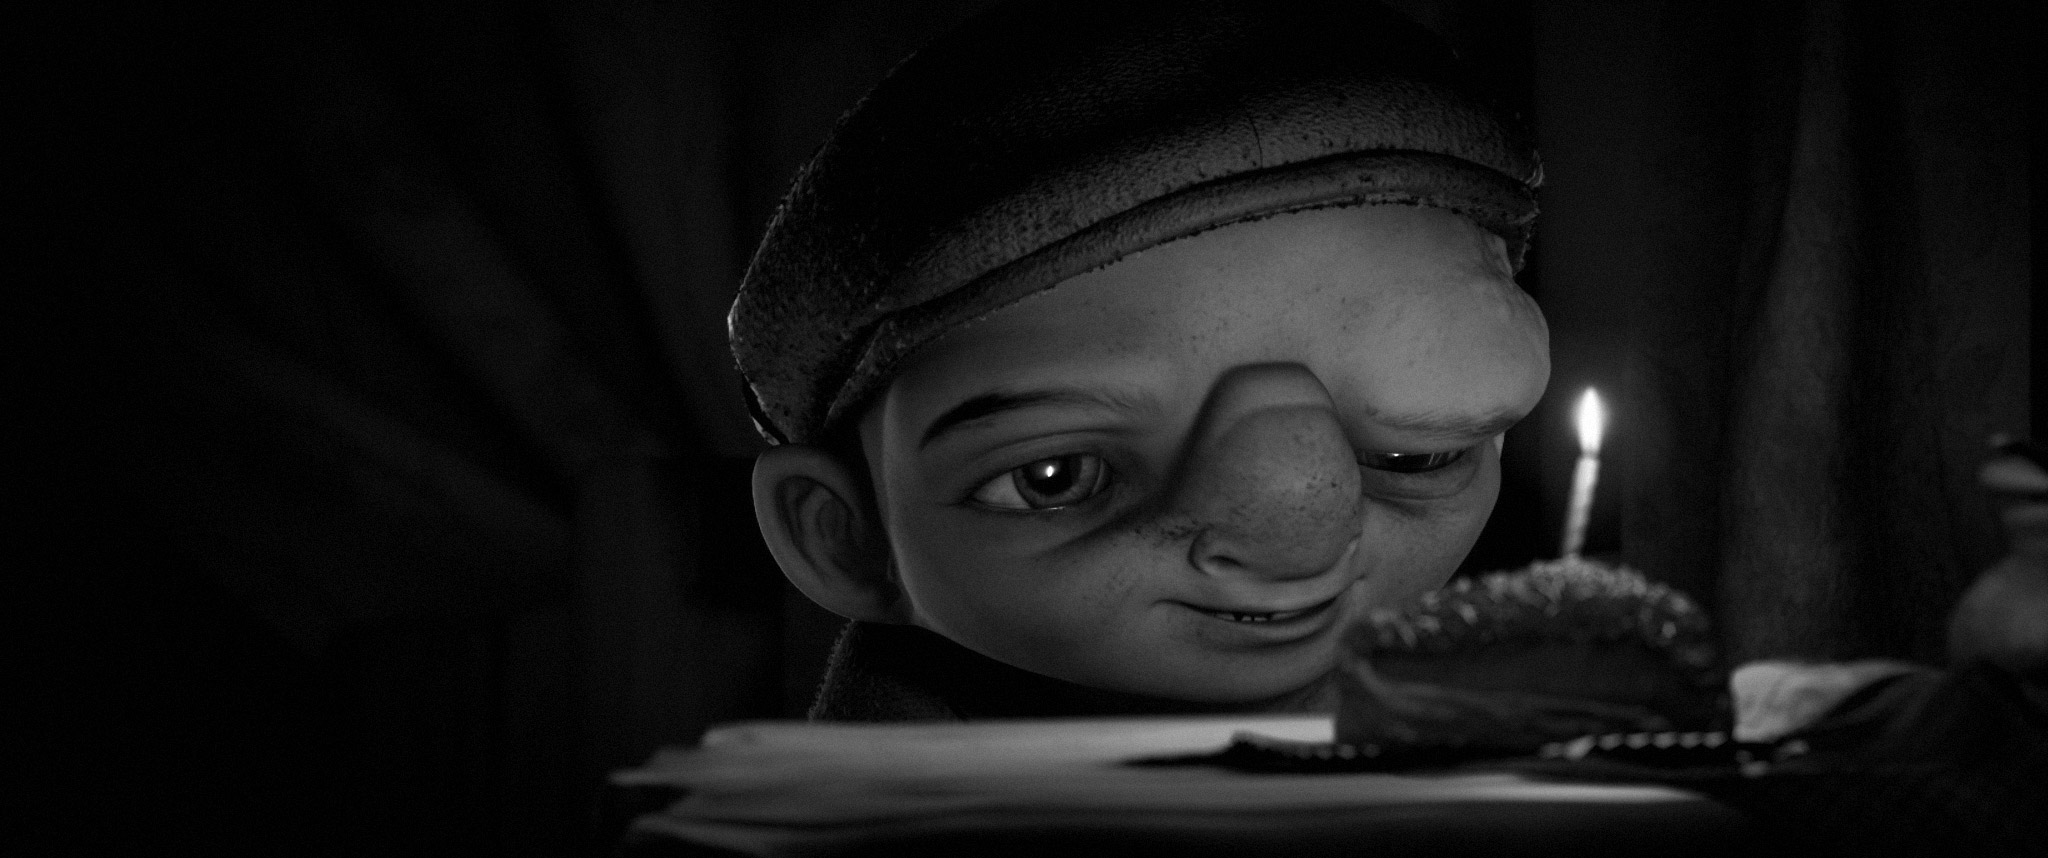 incredible-and-touching-animated-short-little-freak-6.jpg